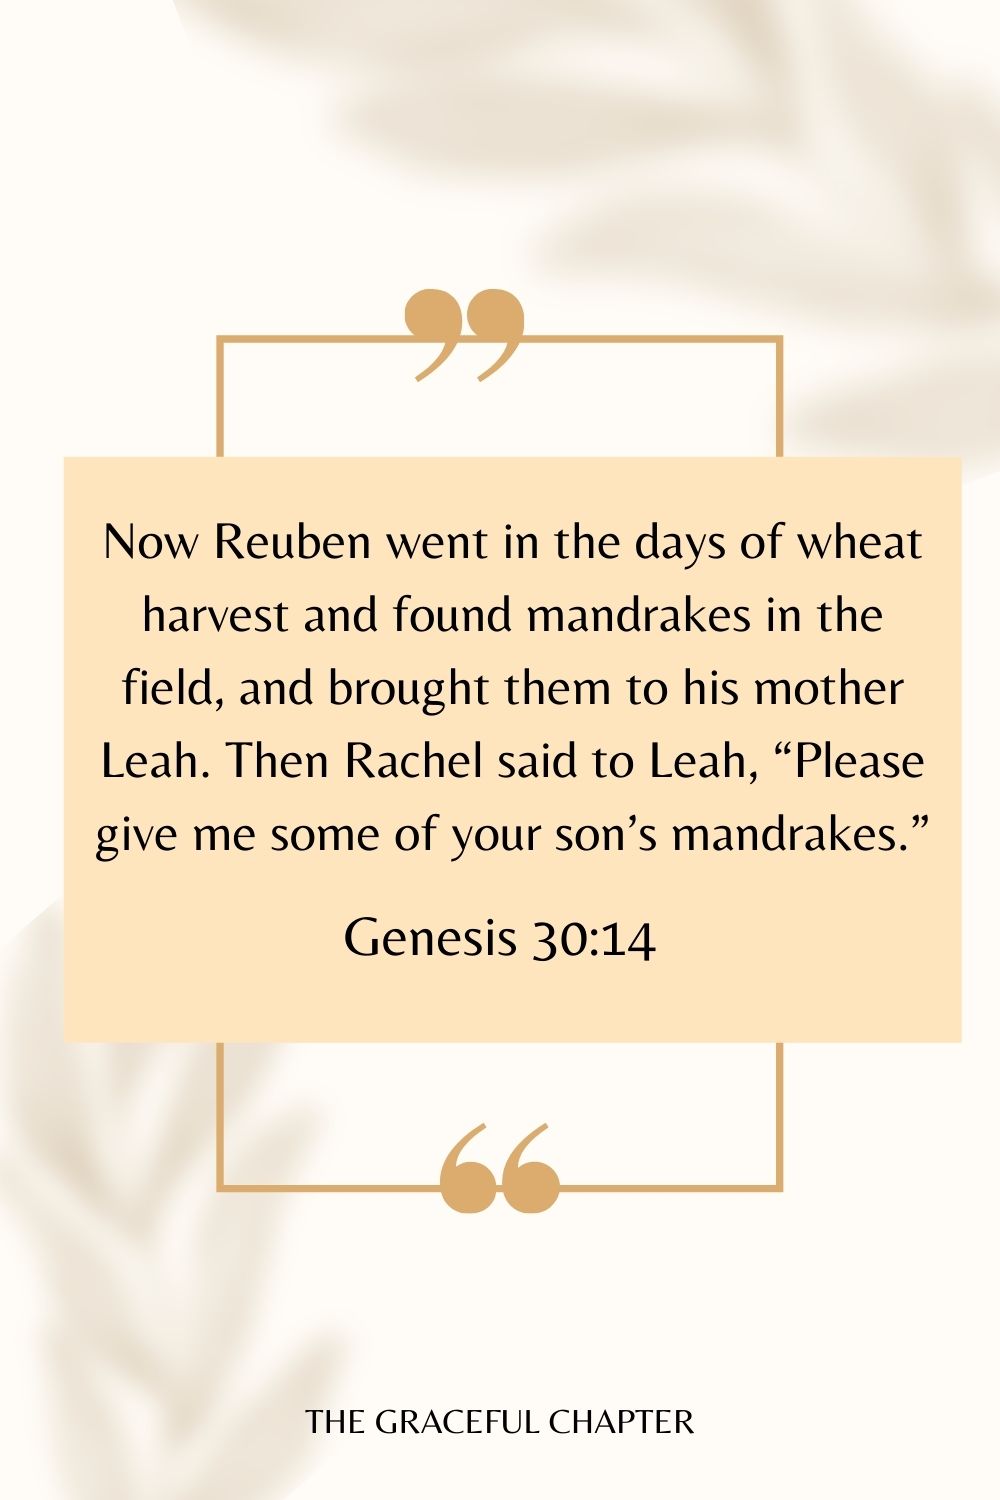 Now Reuben went in the days of wheat harvest and found mandrakes in the field, and brought them to his mother Leah. Then Rachel said to Leah, “Please give me some of your son’s mandrakes.” Genesis 30:14